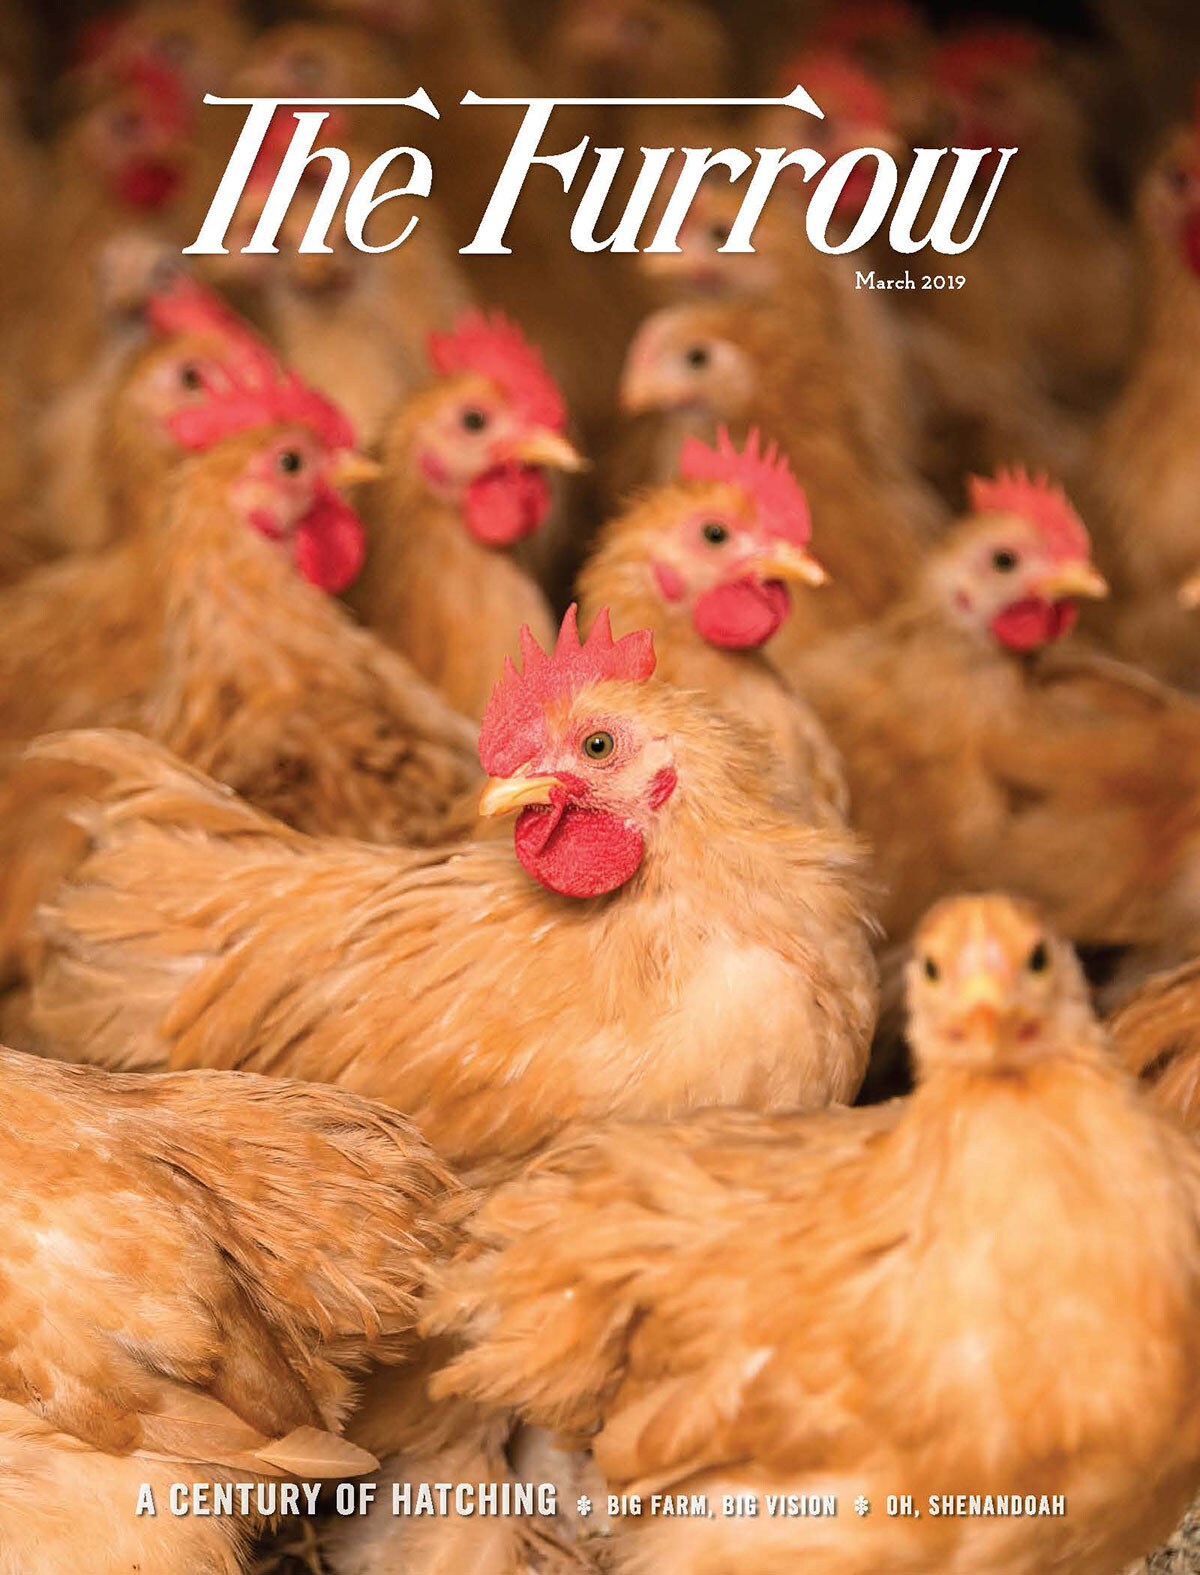 The Furrow - March 2019 Issue